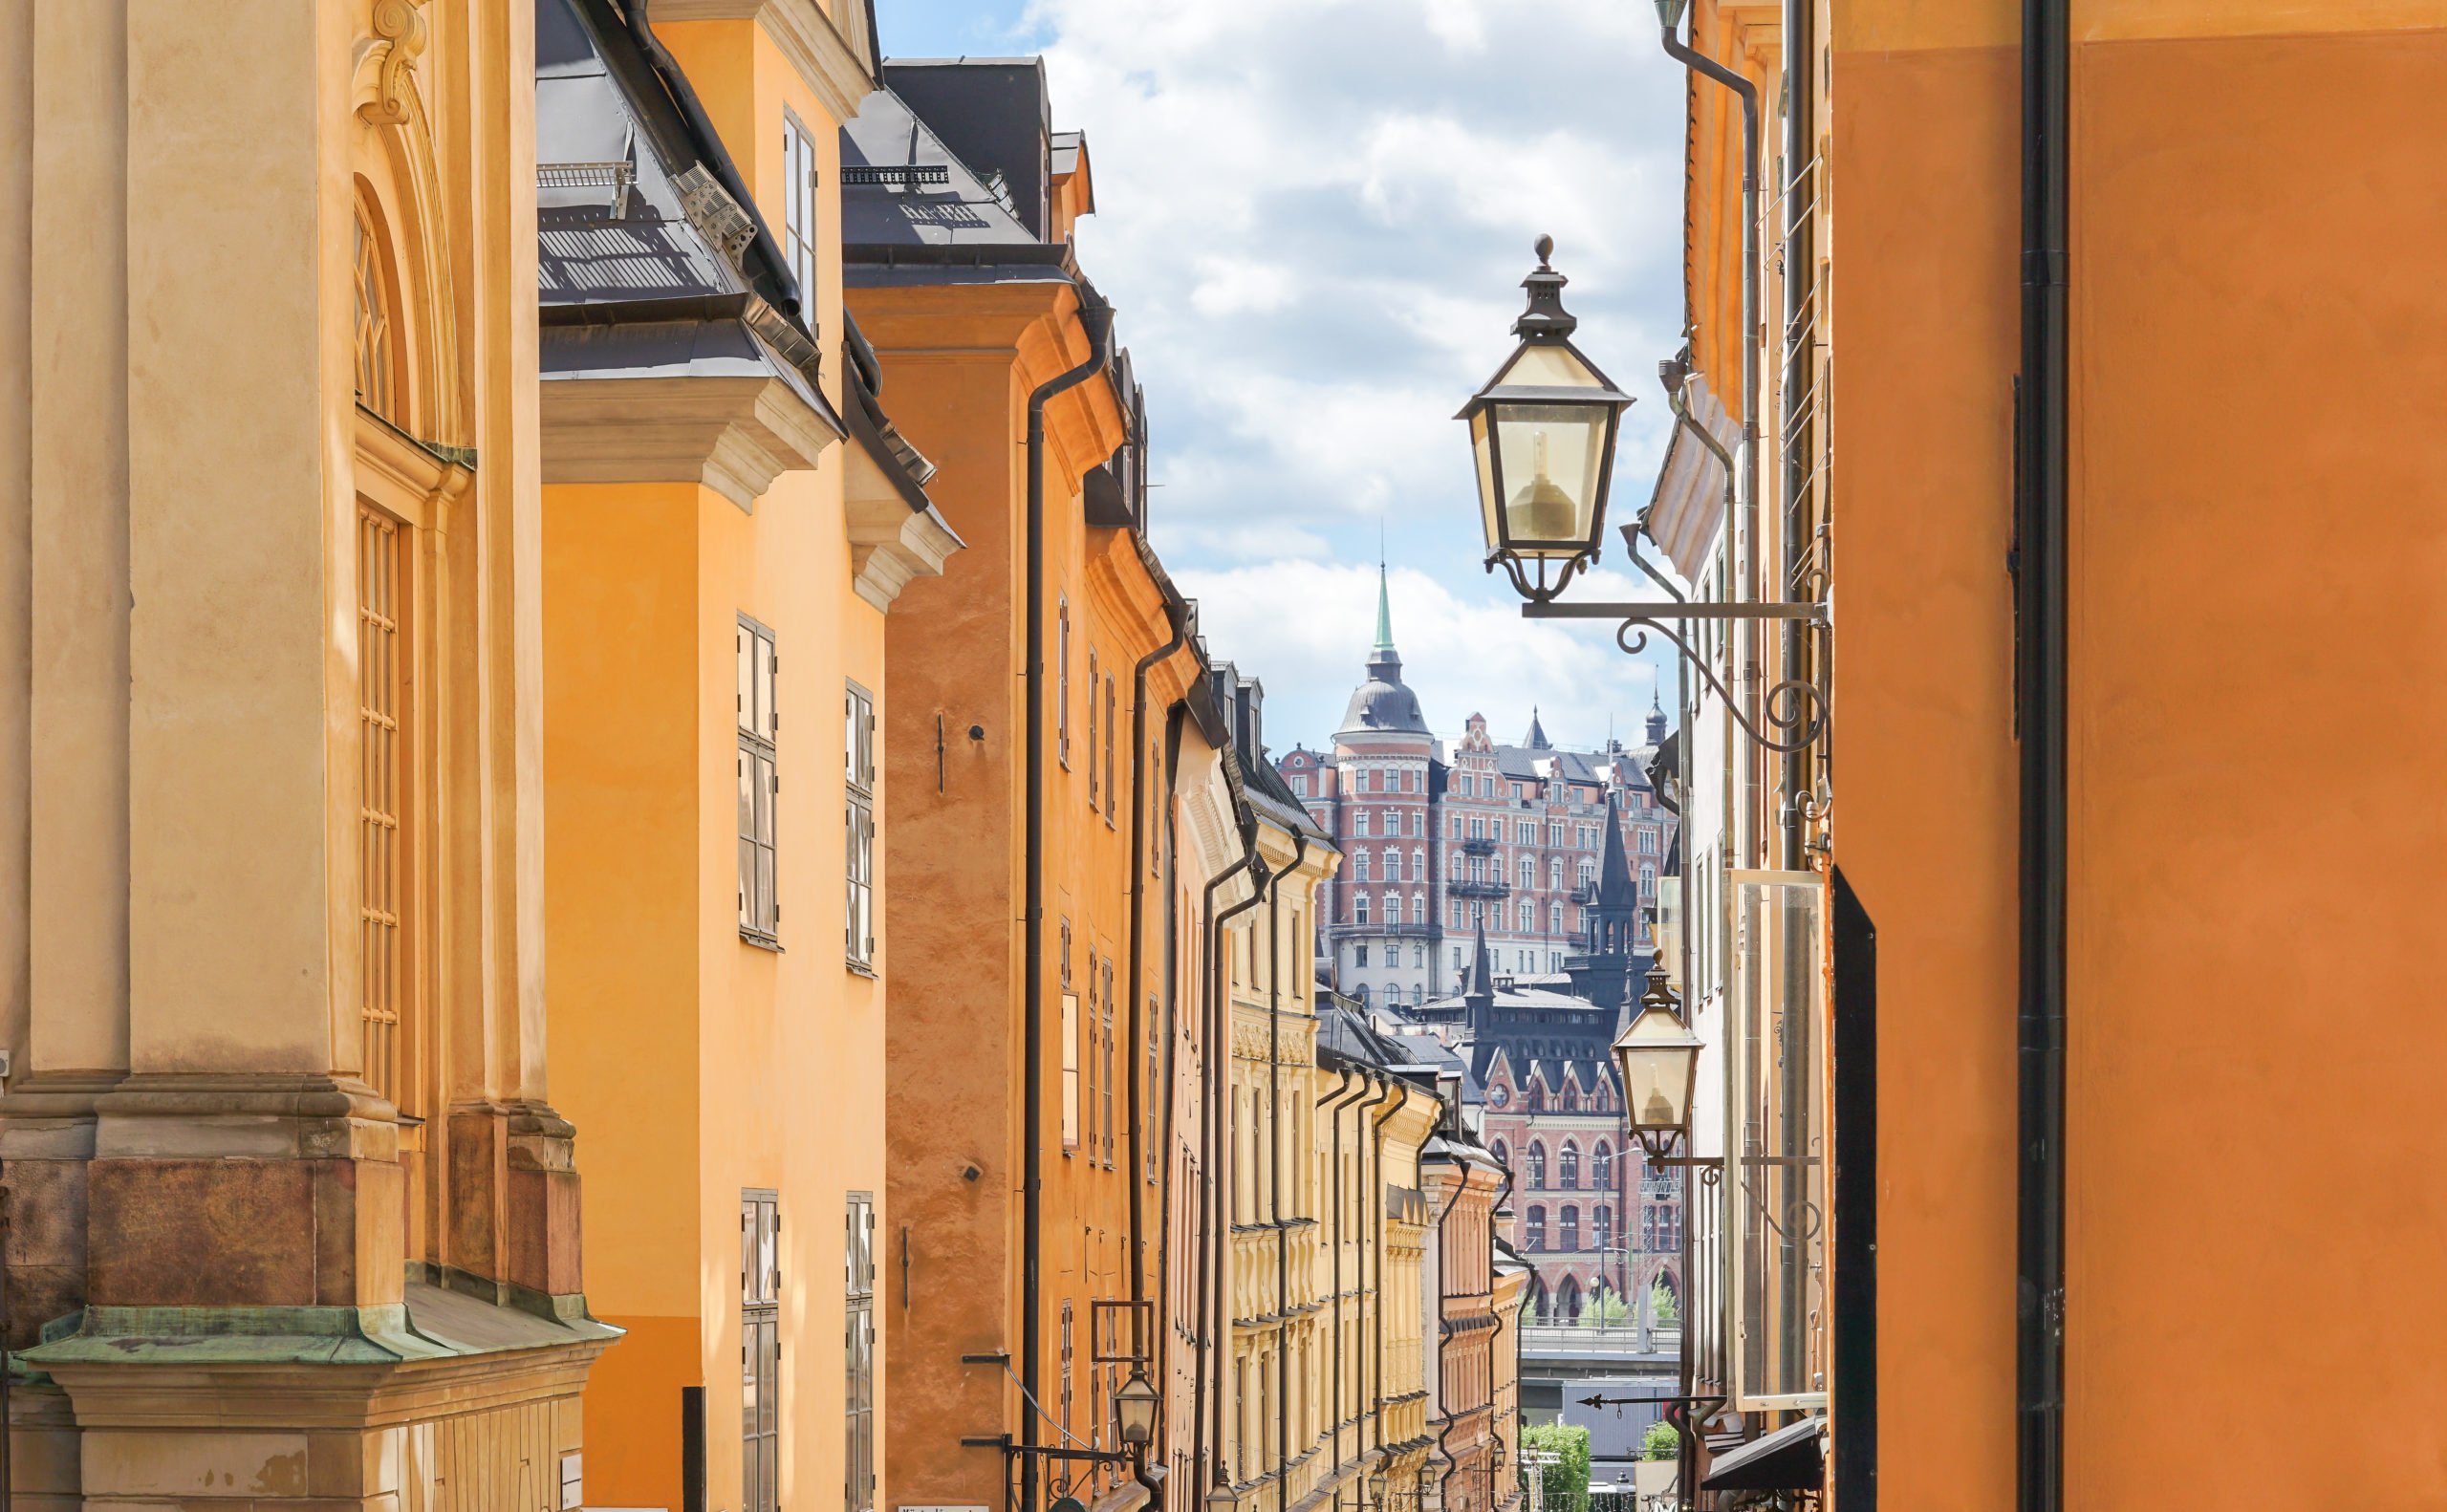 Surveying, setting out, scanning, mobile mapping and port surveying are just a few of the land surveying services creating a foundation for the development of Stockholm